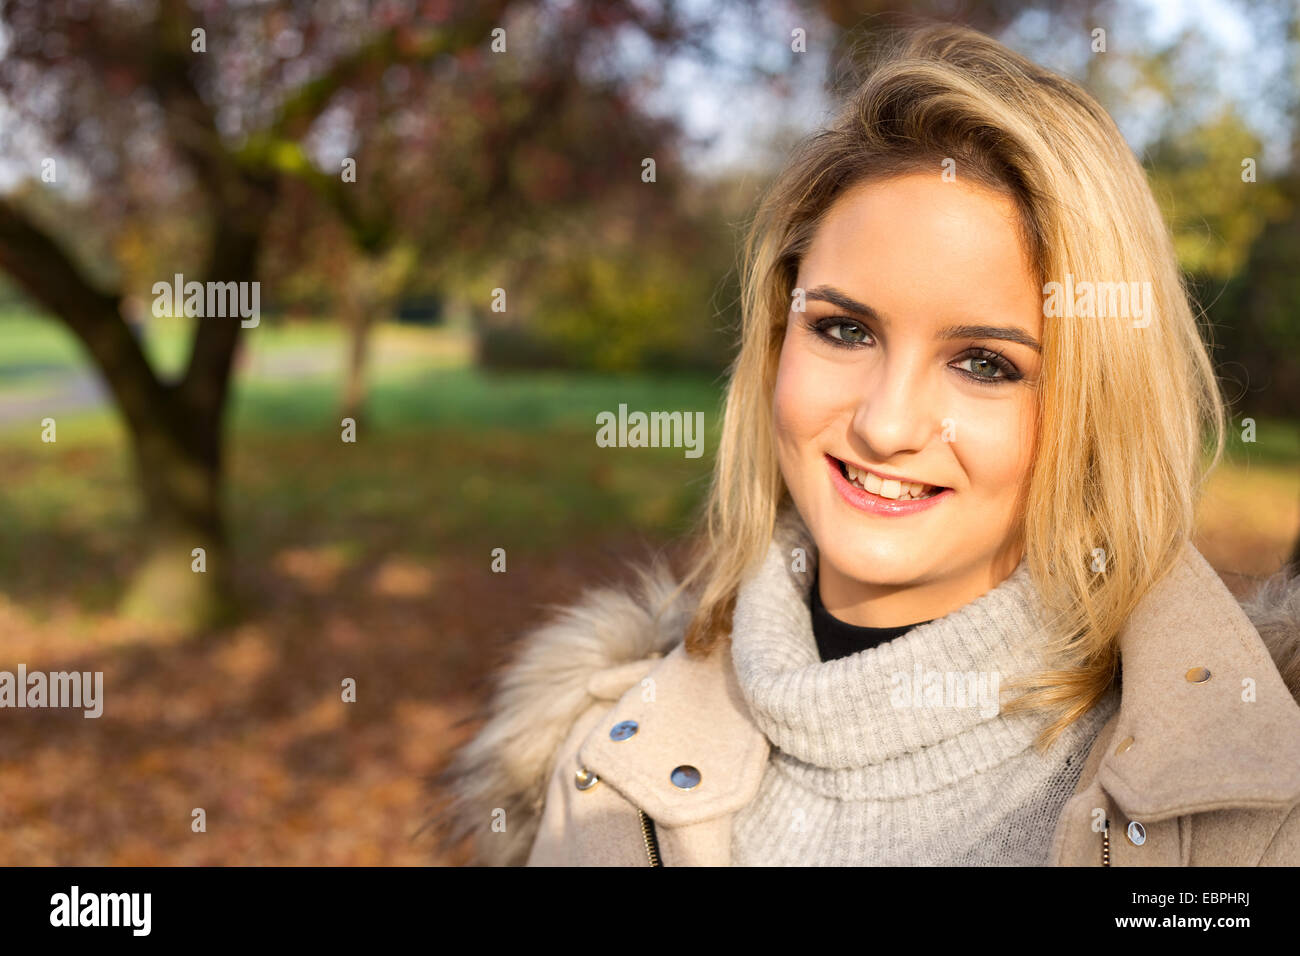 beautiful blonde in a park. Stock Photo